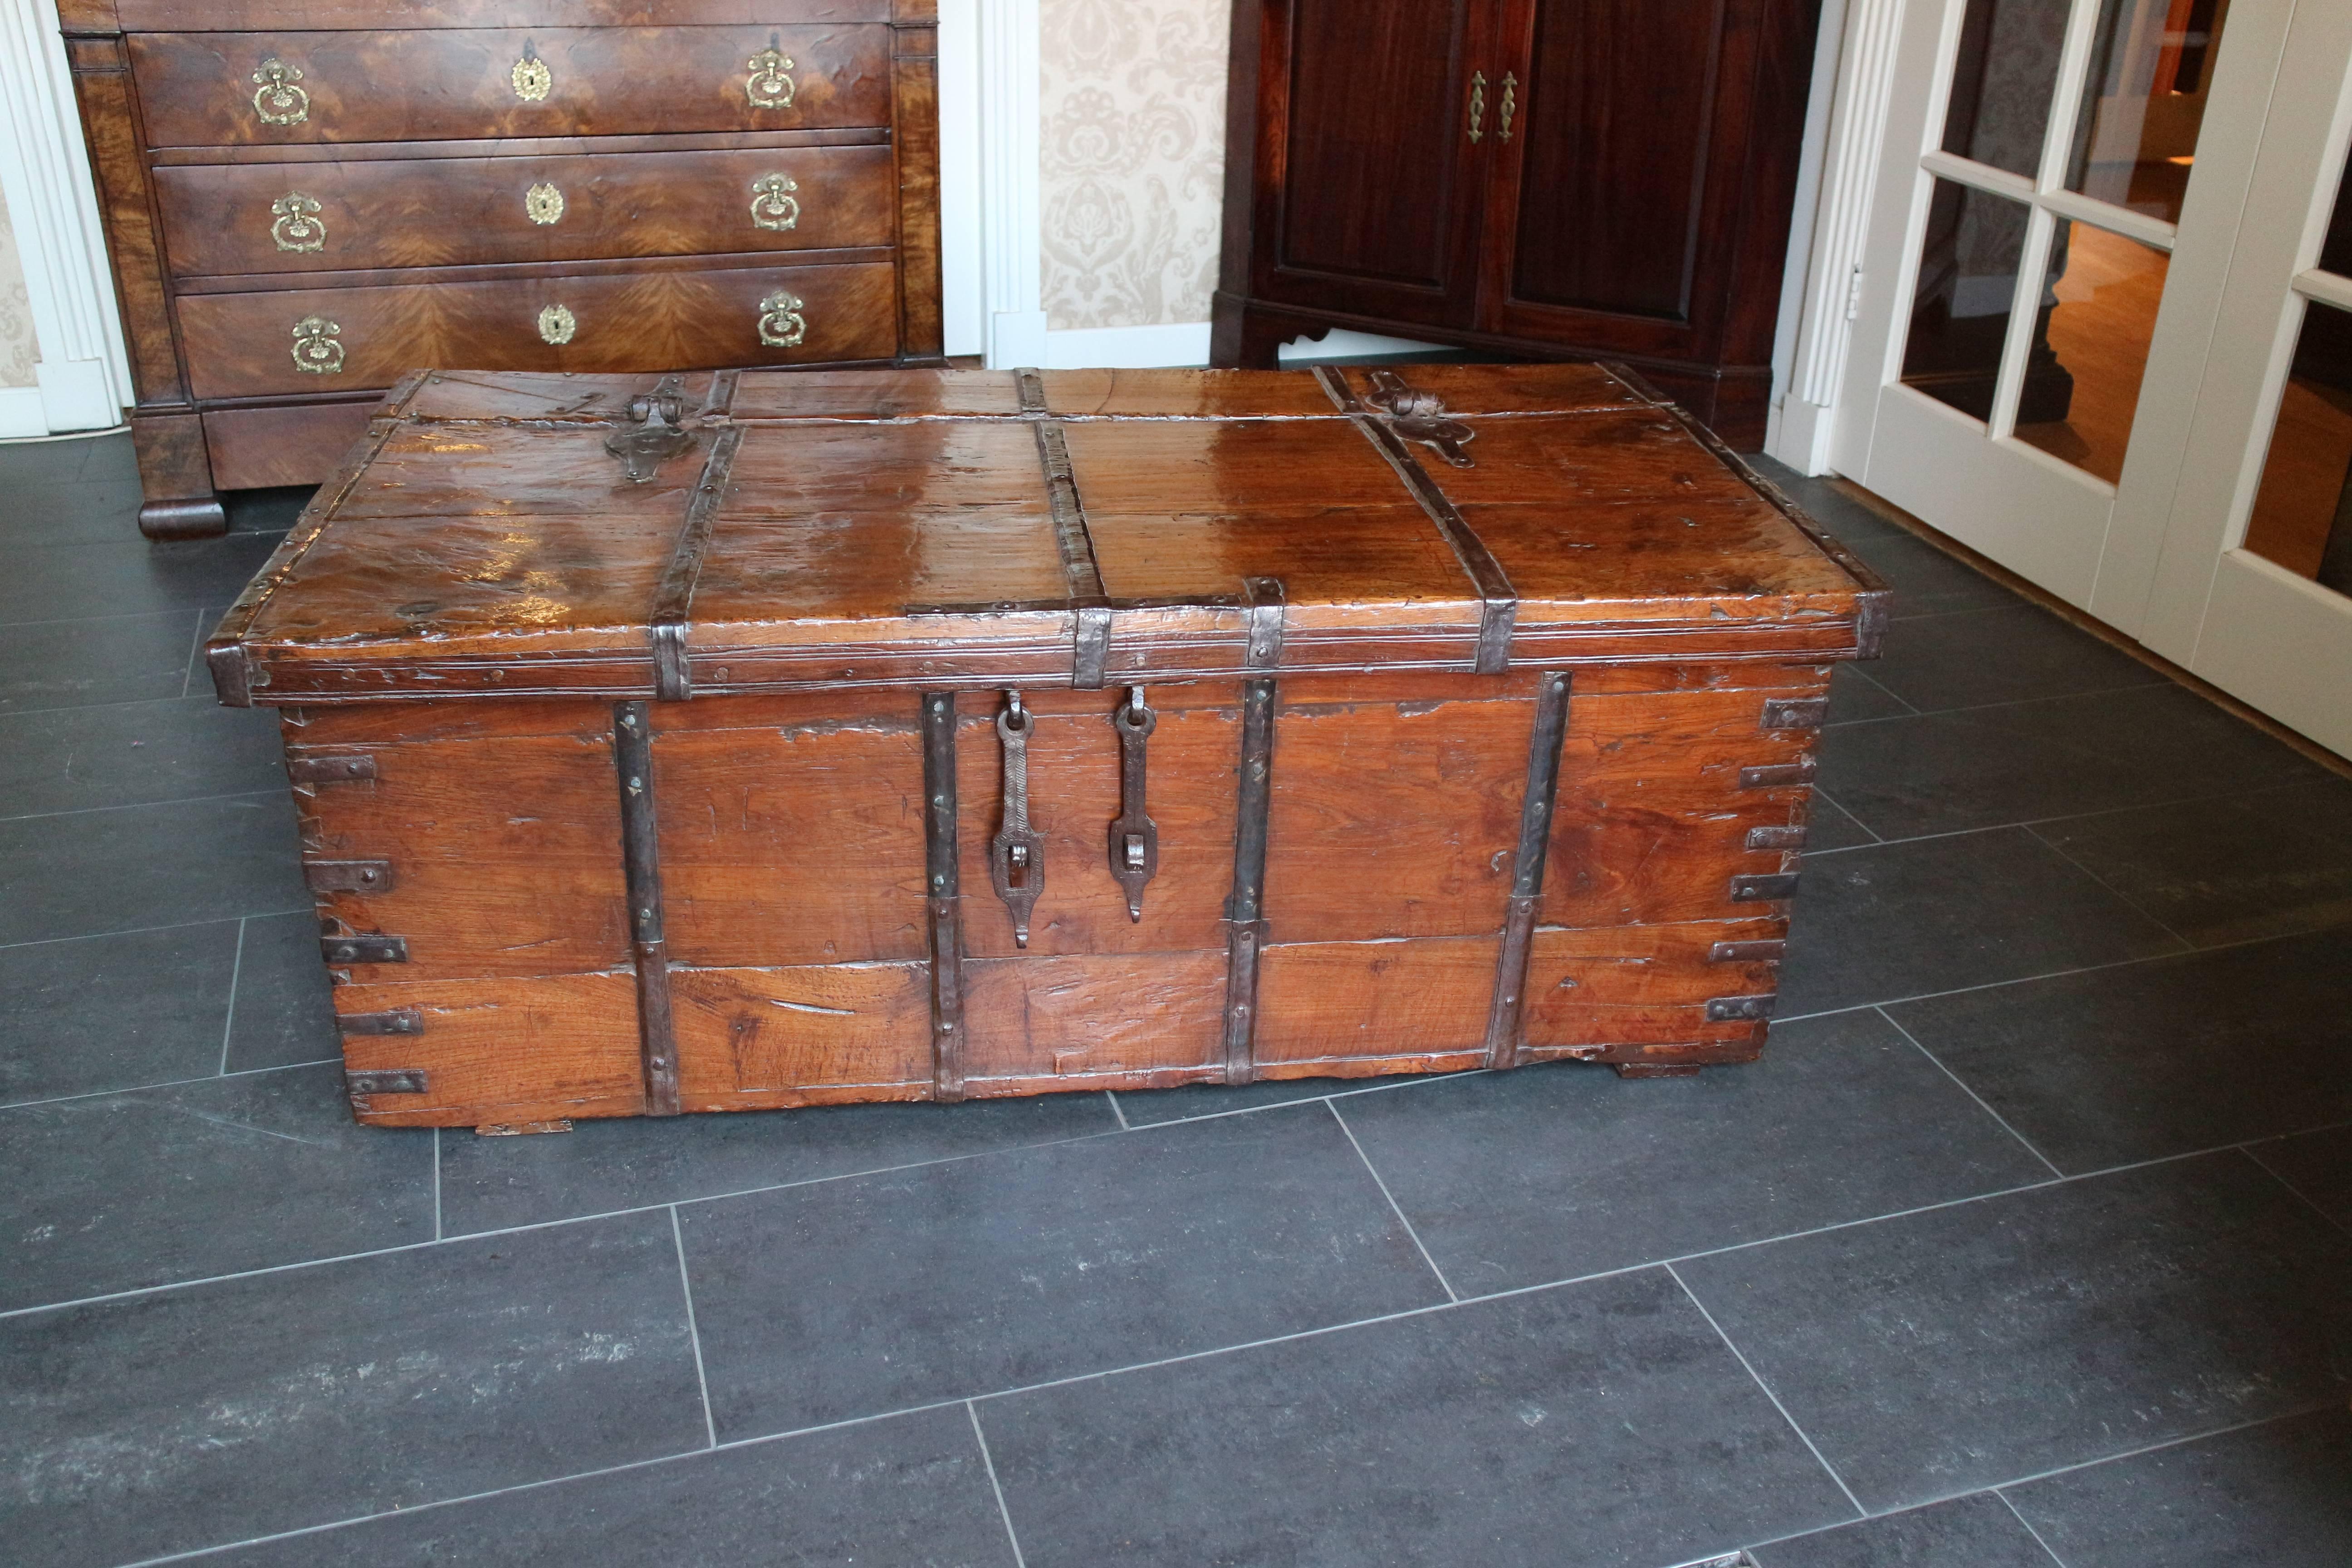 Beautiful large antique chest or coffee table.
Origin: Colonial England. (India)
Period: 19th century
Measure. W 137 cm, D 76 cm, H 51 cm.